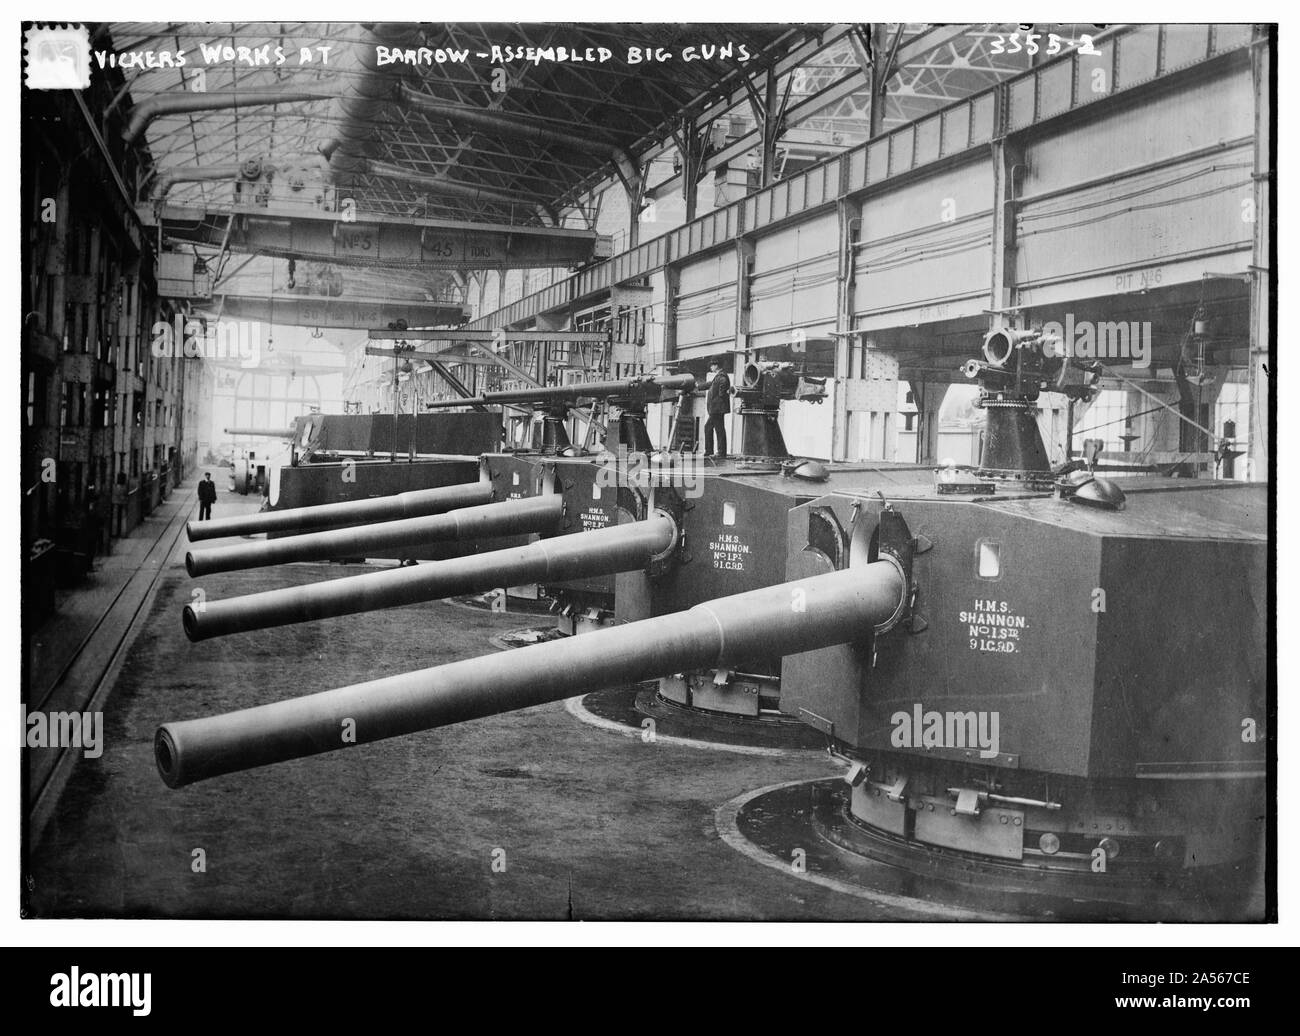 Vickers Works by Barrow -- Assembled big guns Stock Photo